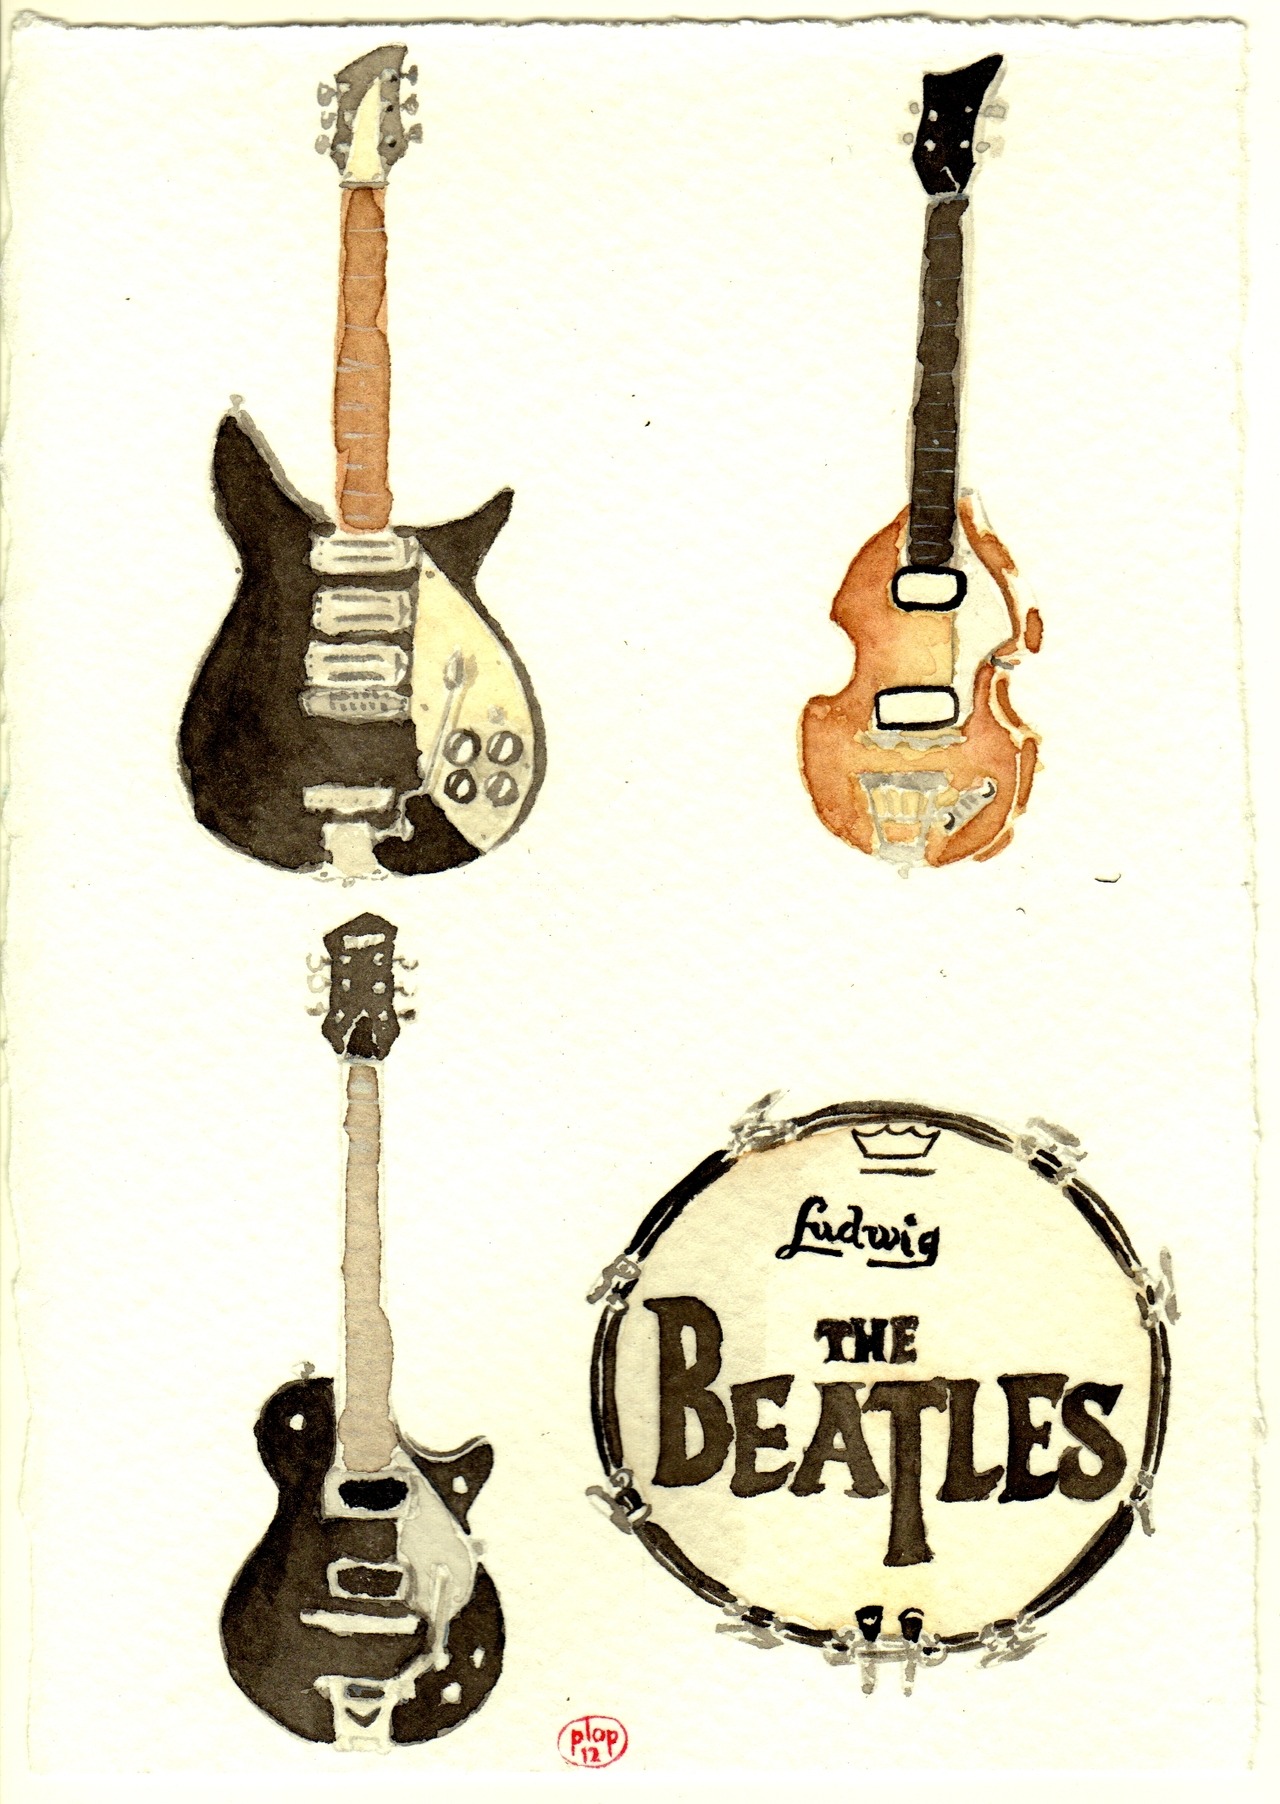 Their Fab Four Instruments by plop